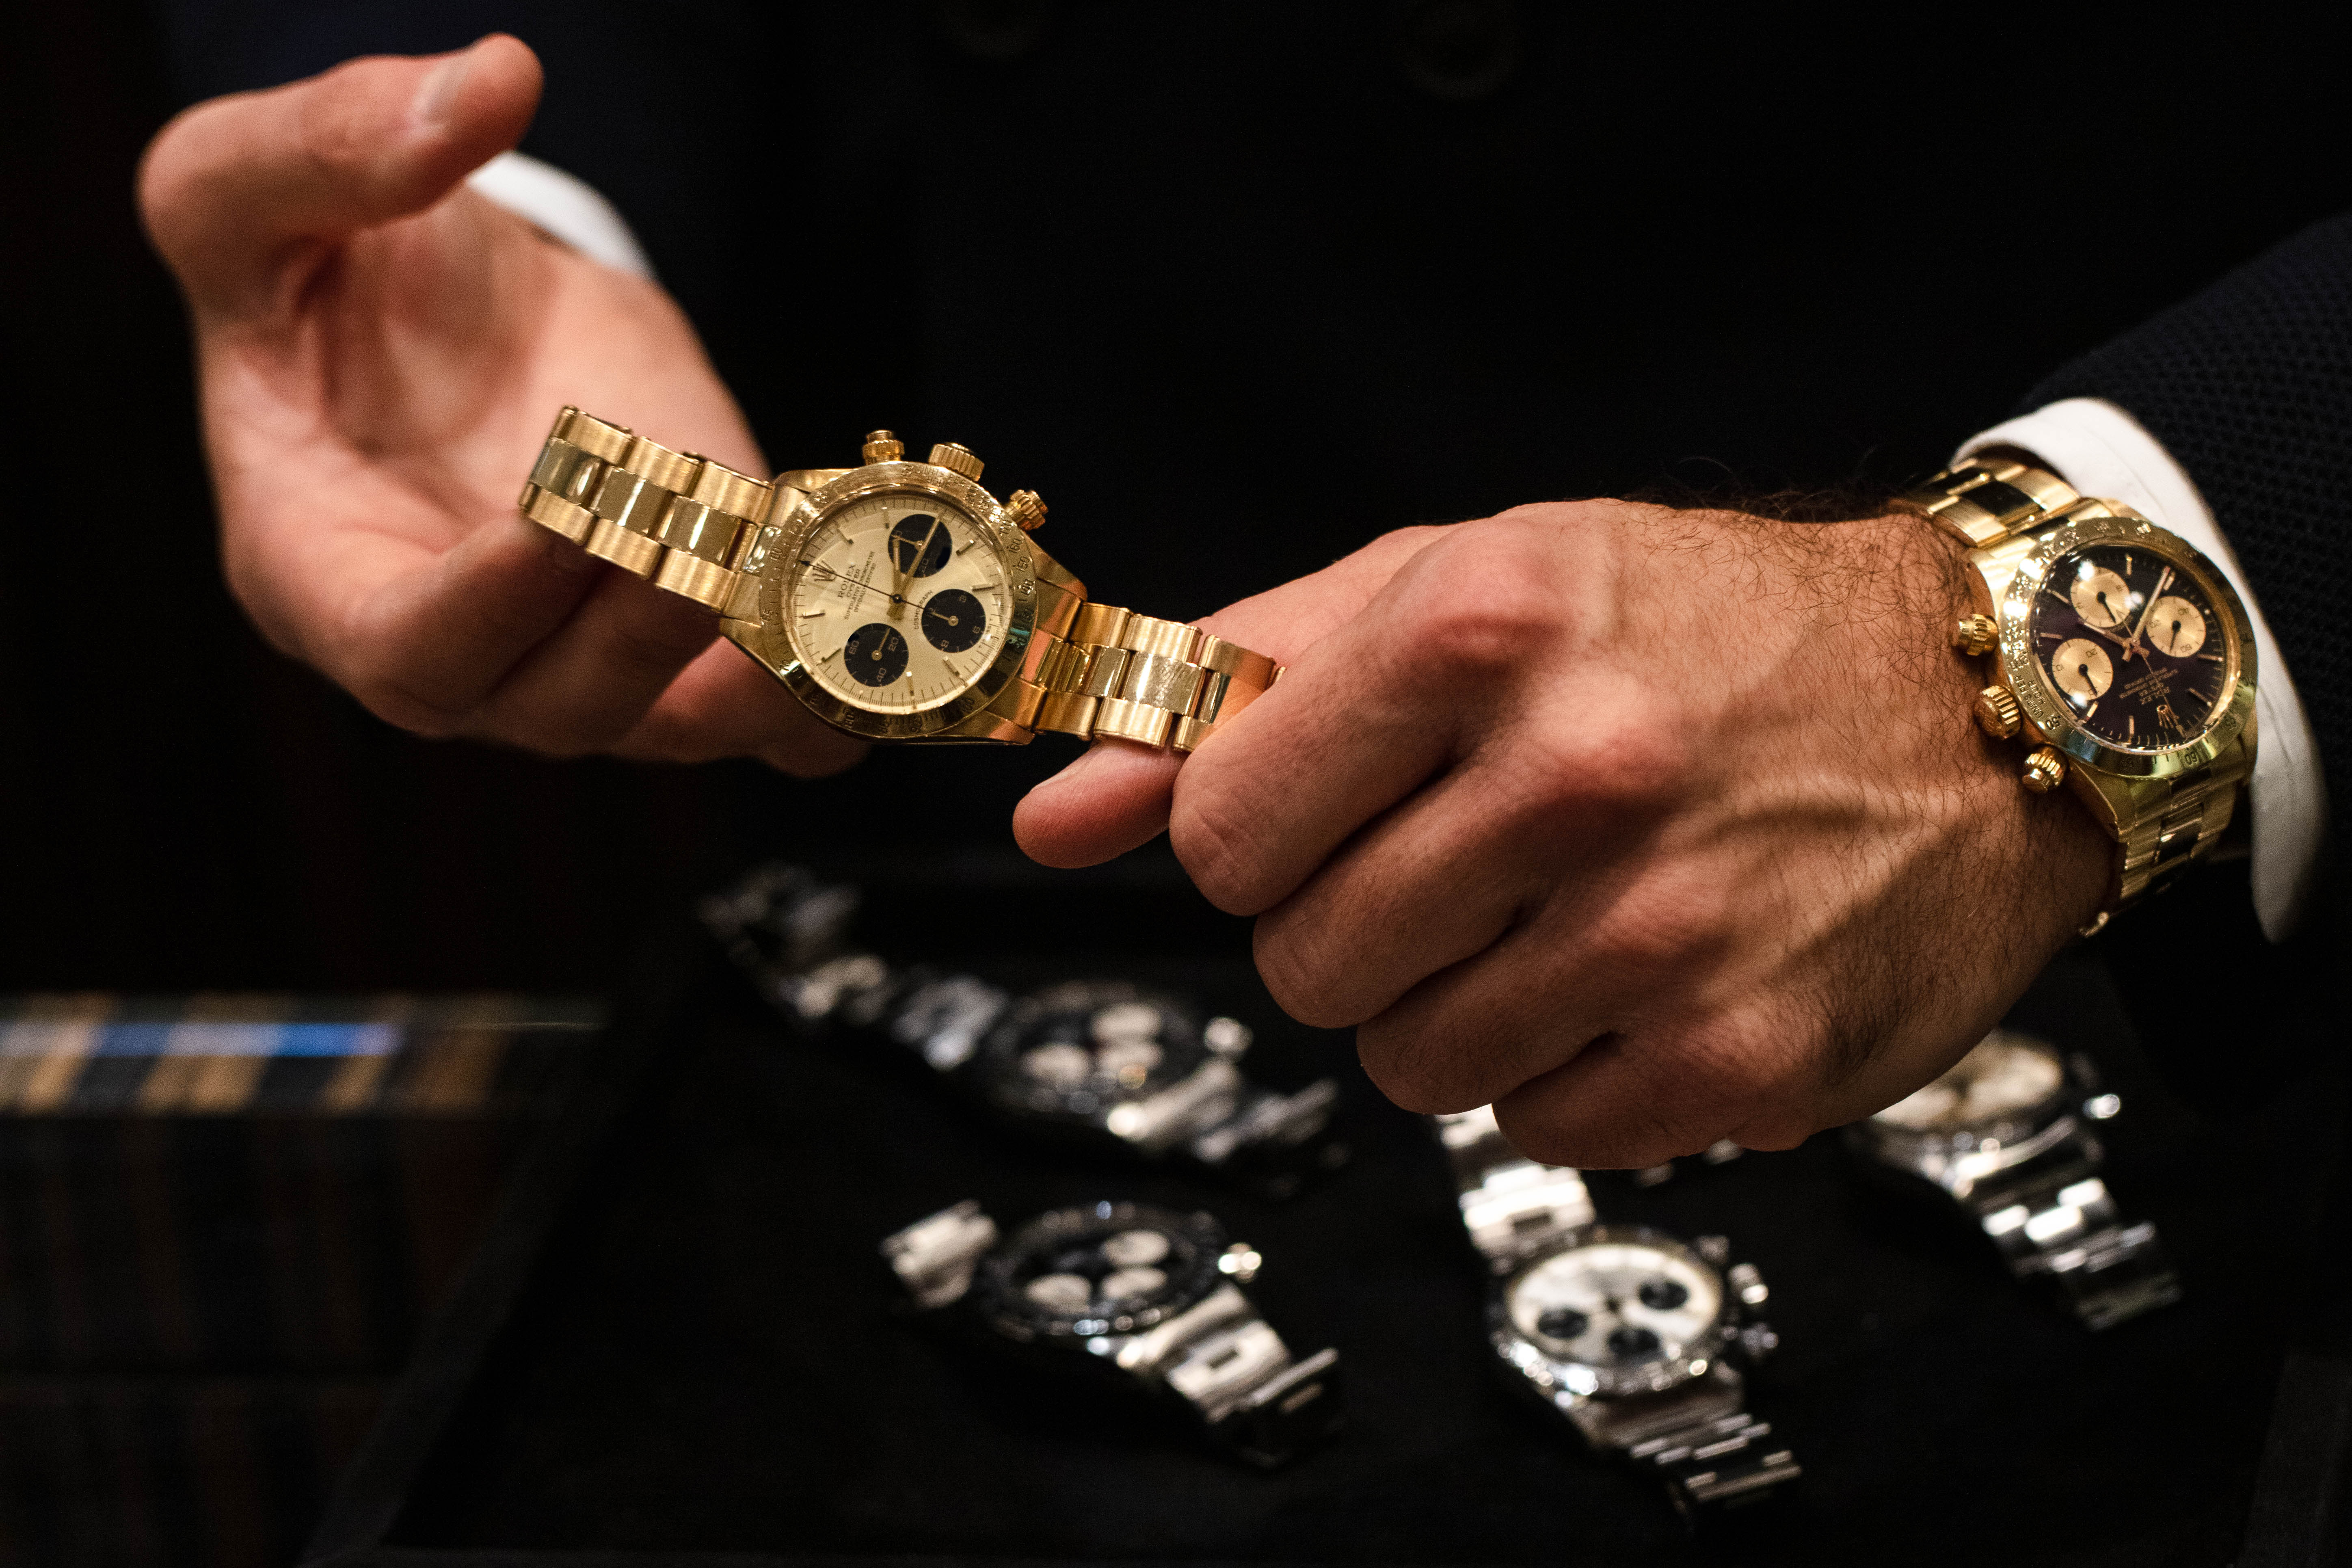 David Silver handles a pair of vintage Rolex Daytonas with contrasting faces